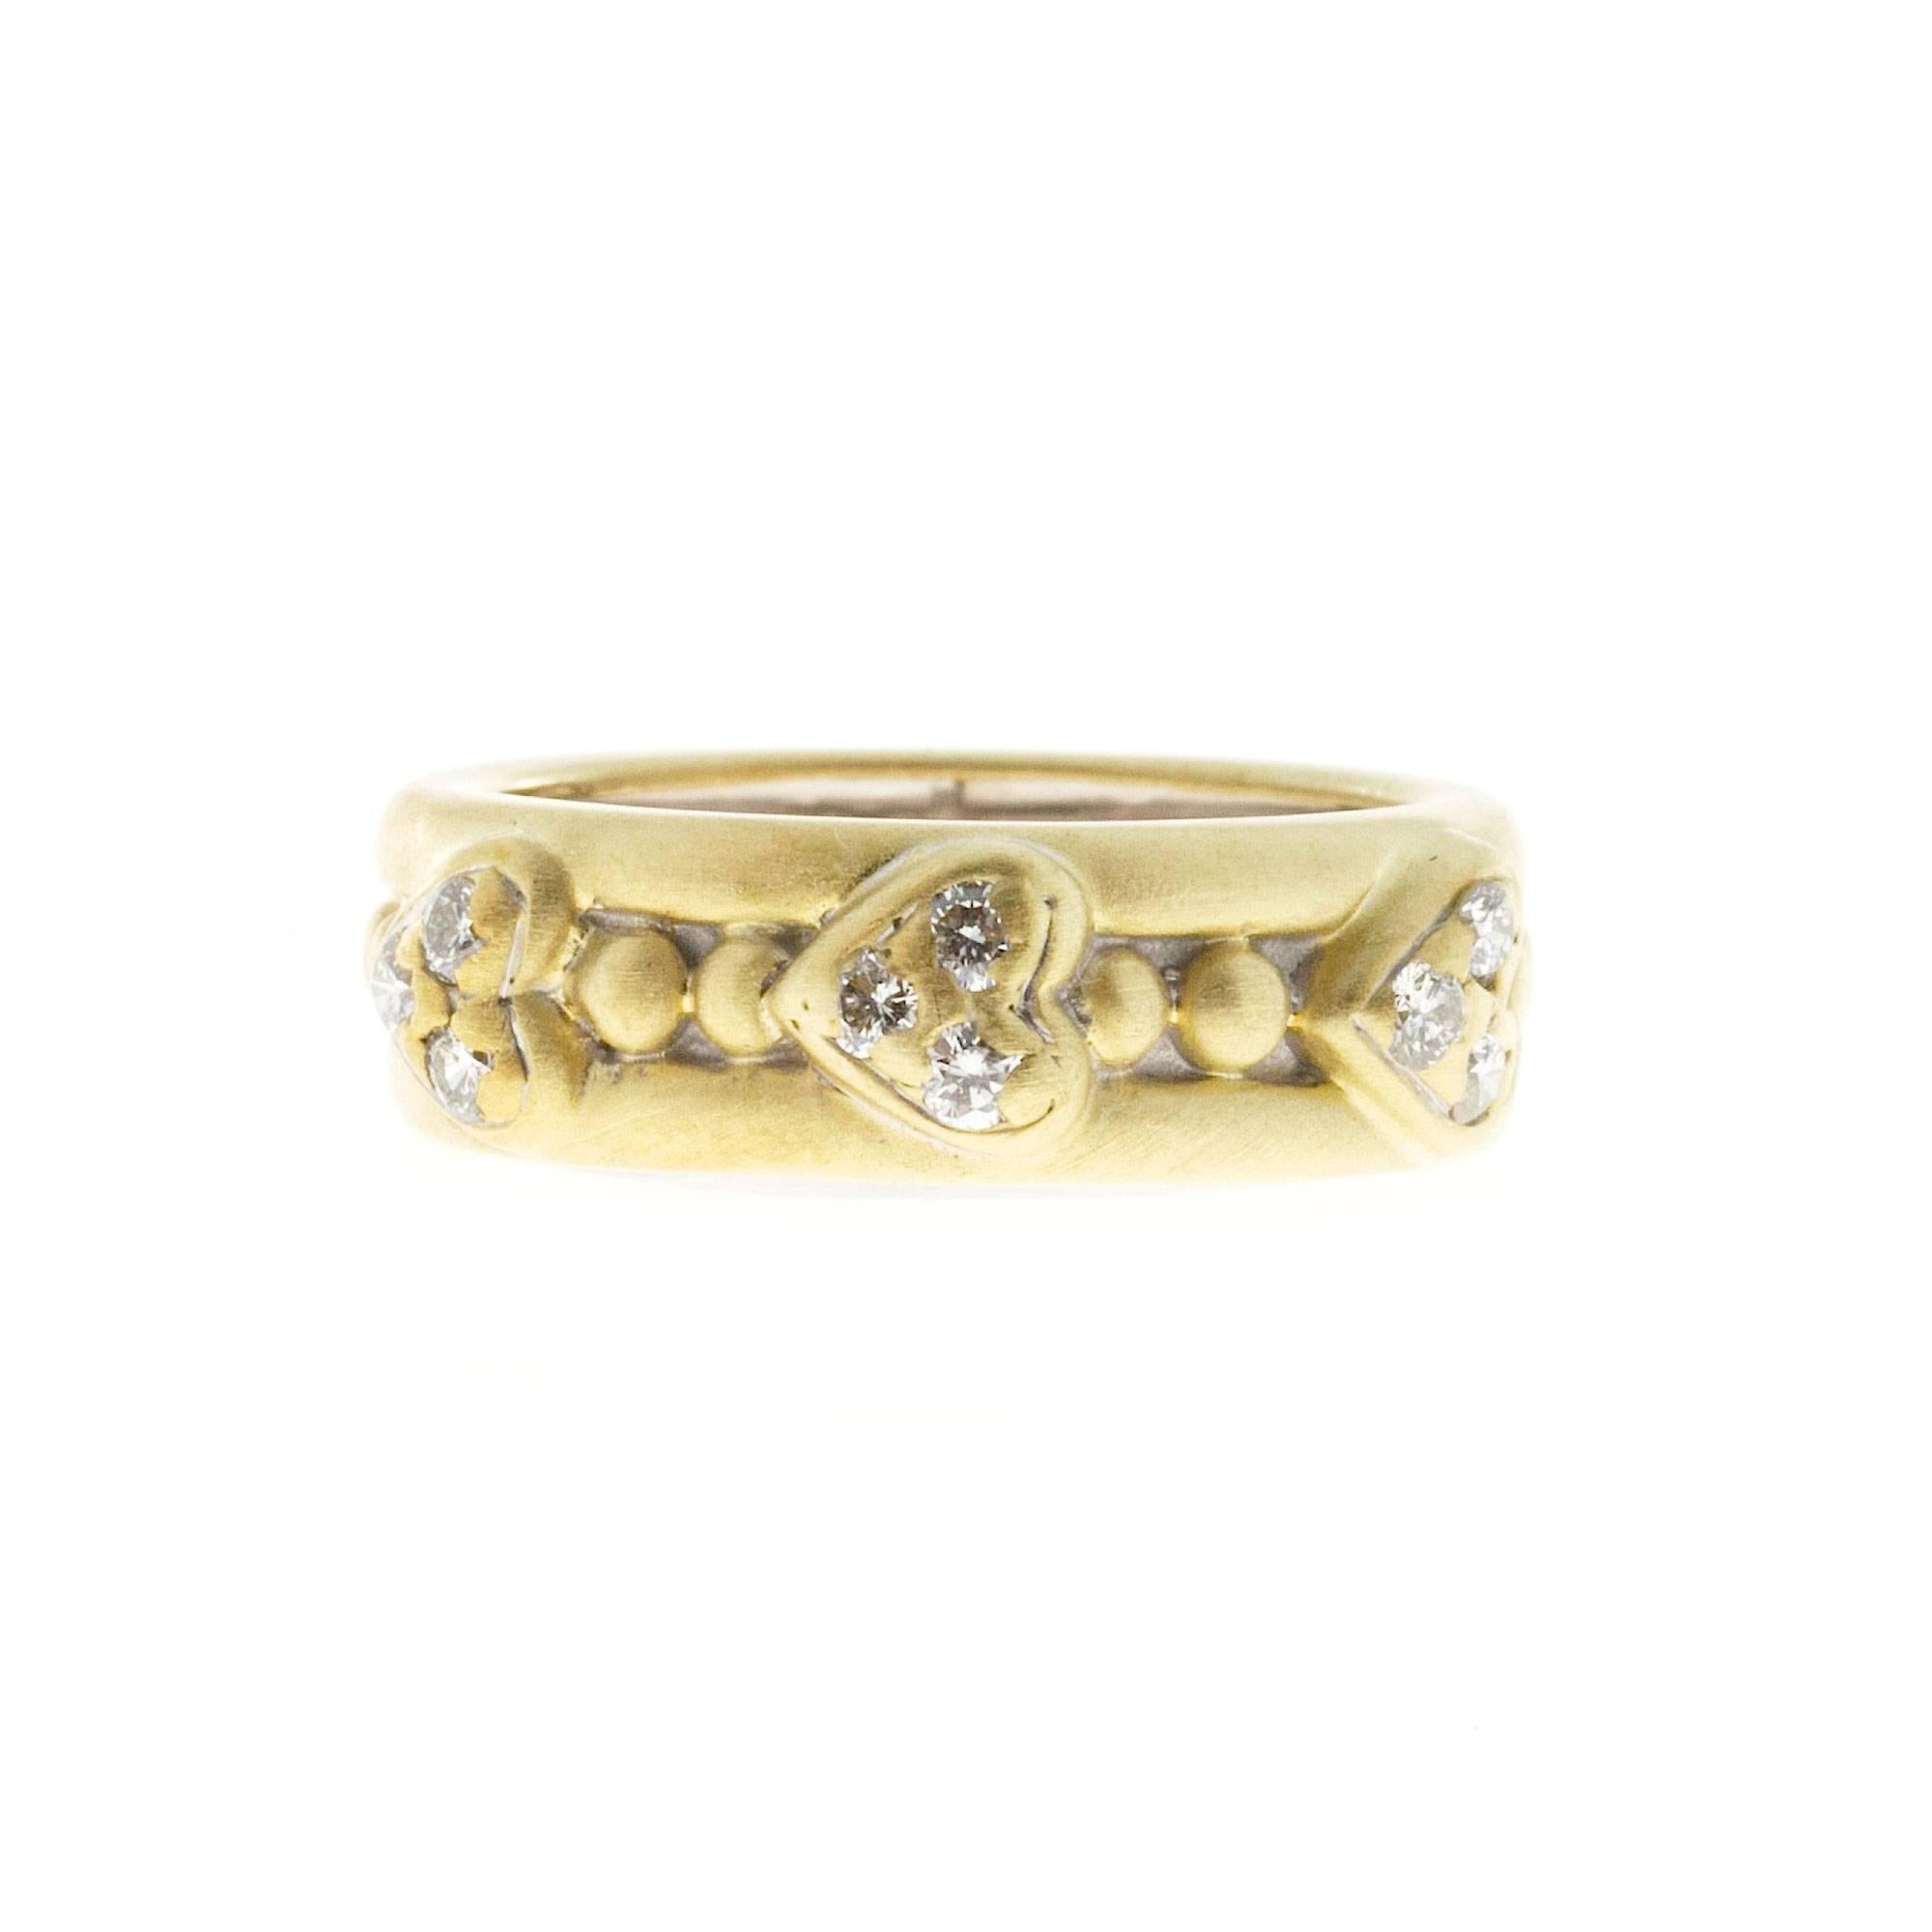 Authentic greenish yellow soft finish Judith Ripka 18k 3 heart 9 diamond band.

9 full cut diamonds, approx. total weight .27cts, H, VS
18k Yellow Gold
Tested and stamped: 18k
© Judith Ripka
Width at top: 6.5mm
Height at top: 3.3mm
Width at